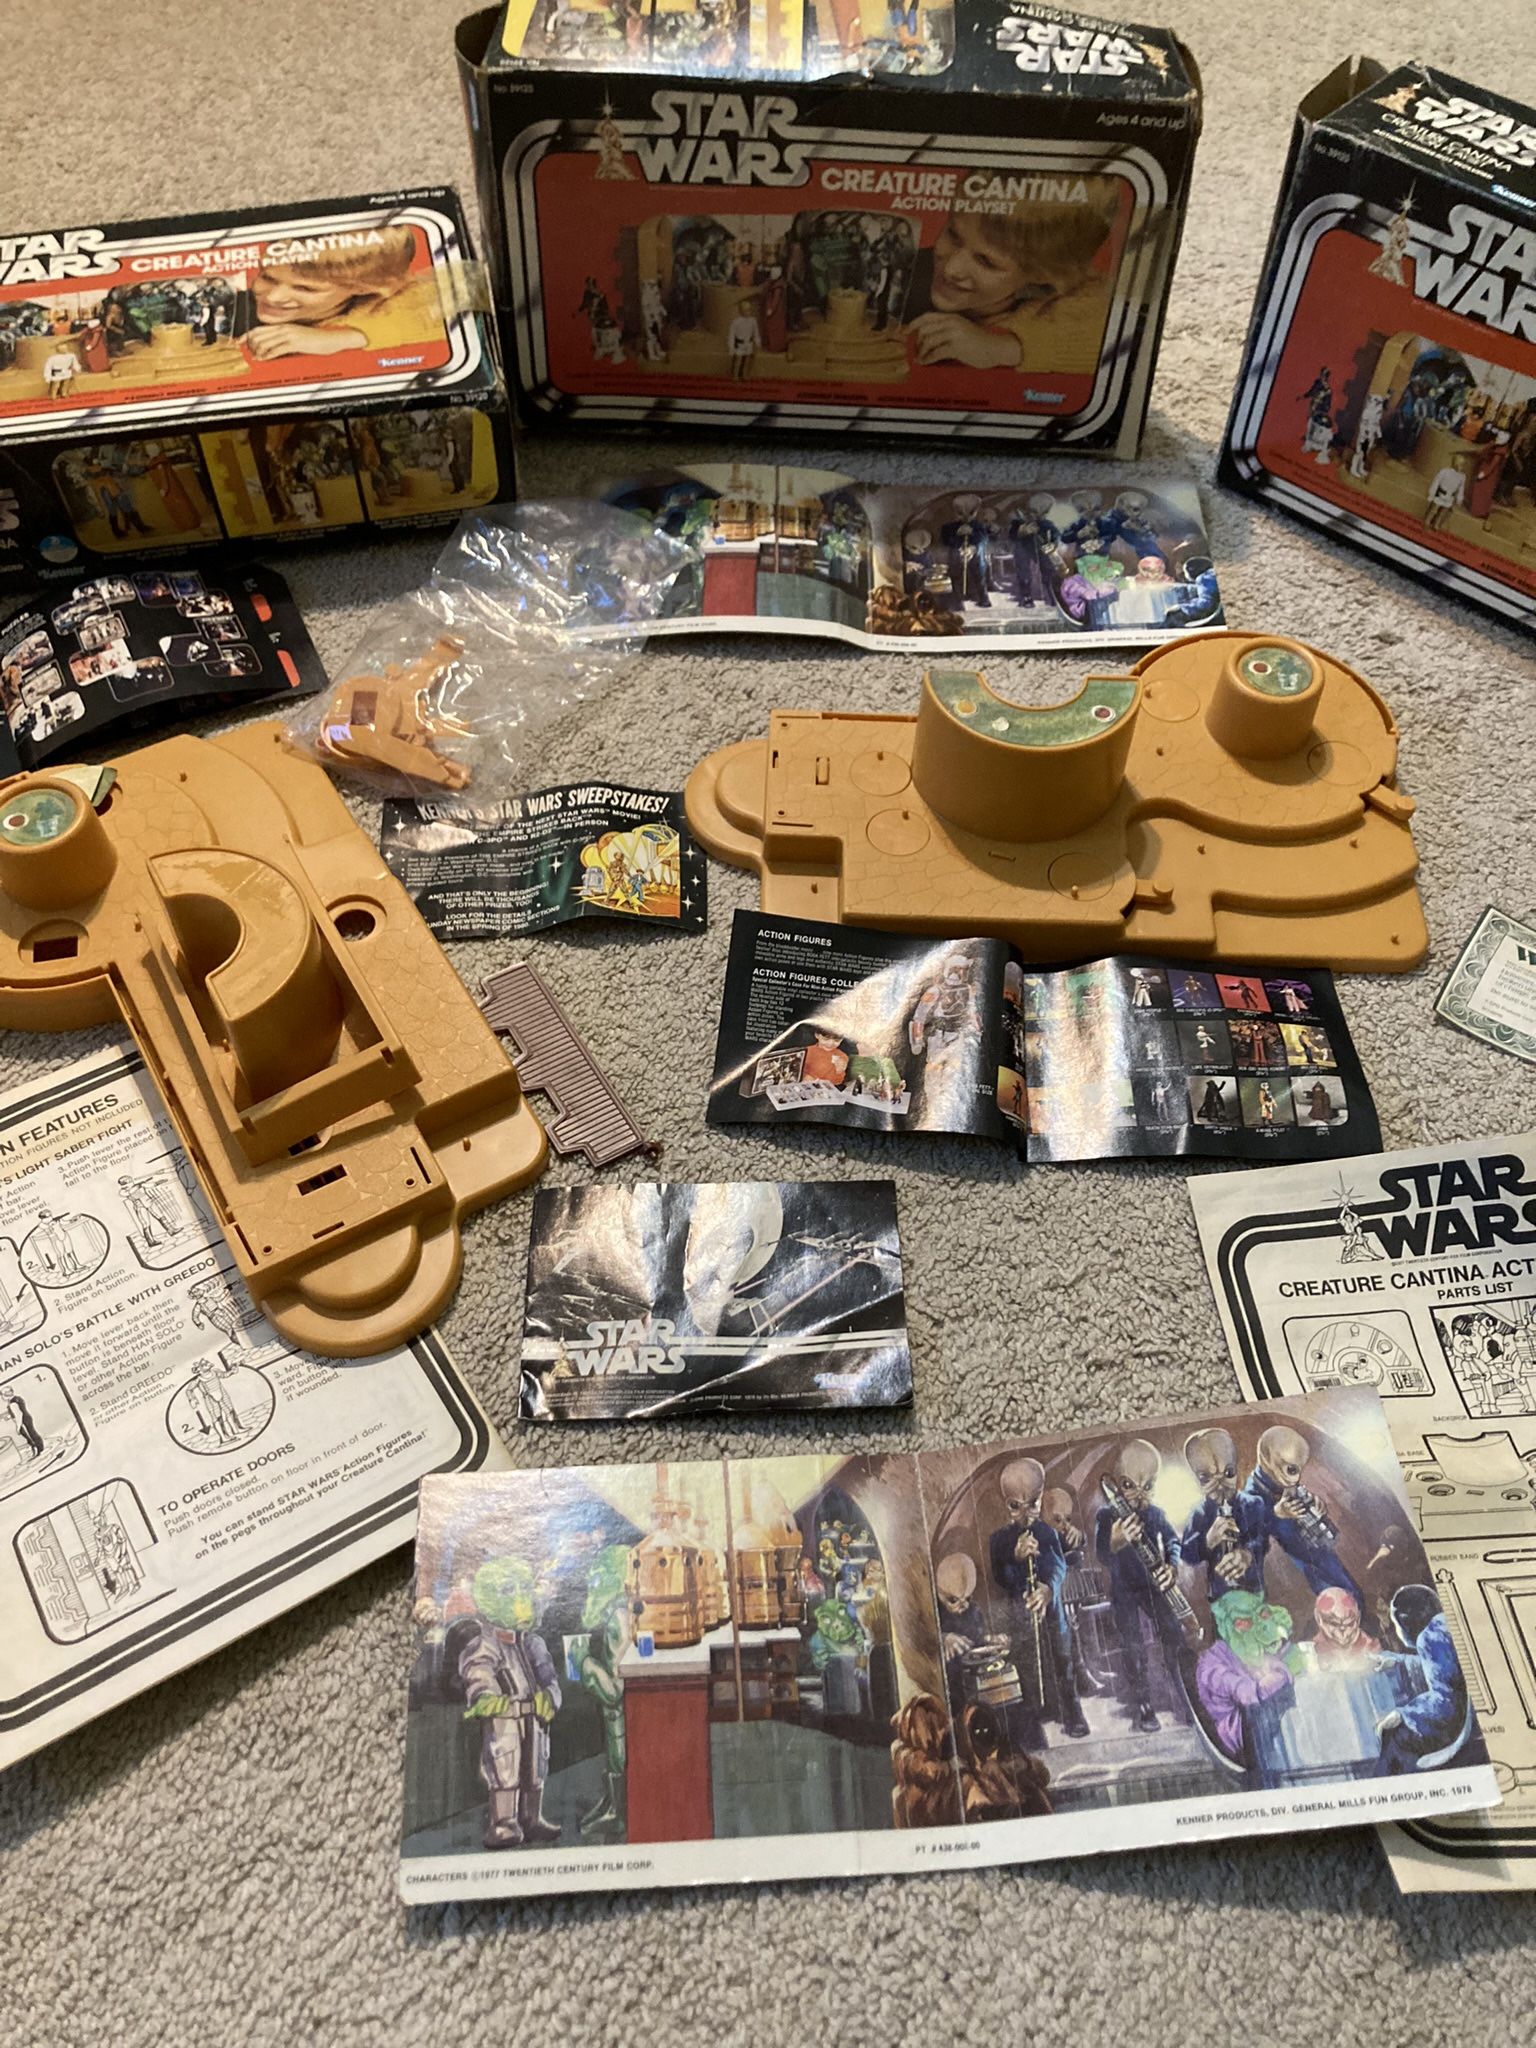 Vintage Star Wars Cantina Toy play sets by Kenner also has 3 cool original Star Wars catalogs.